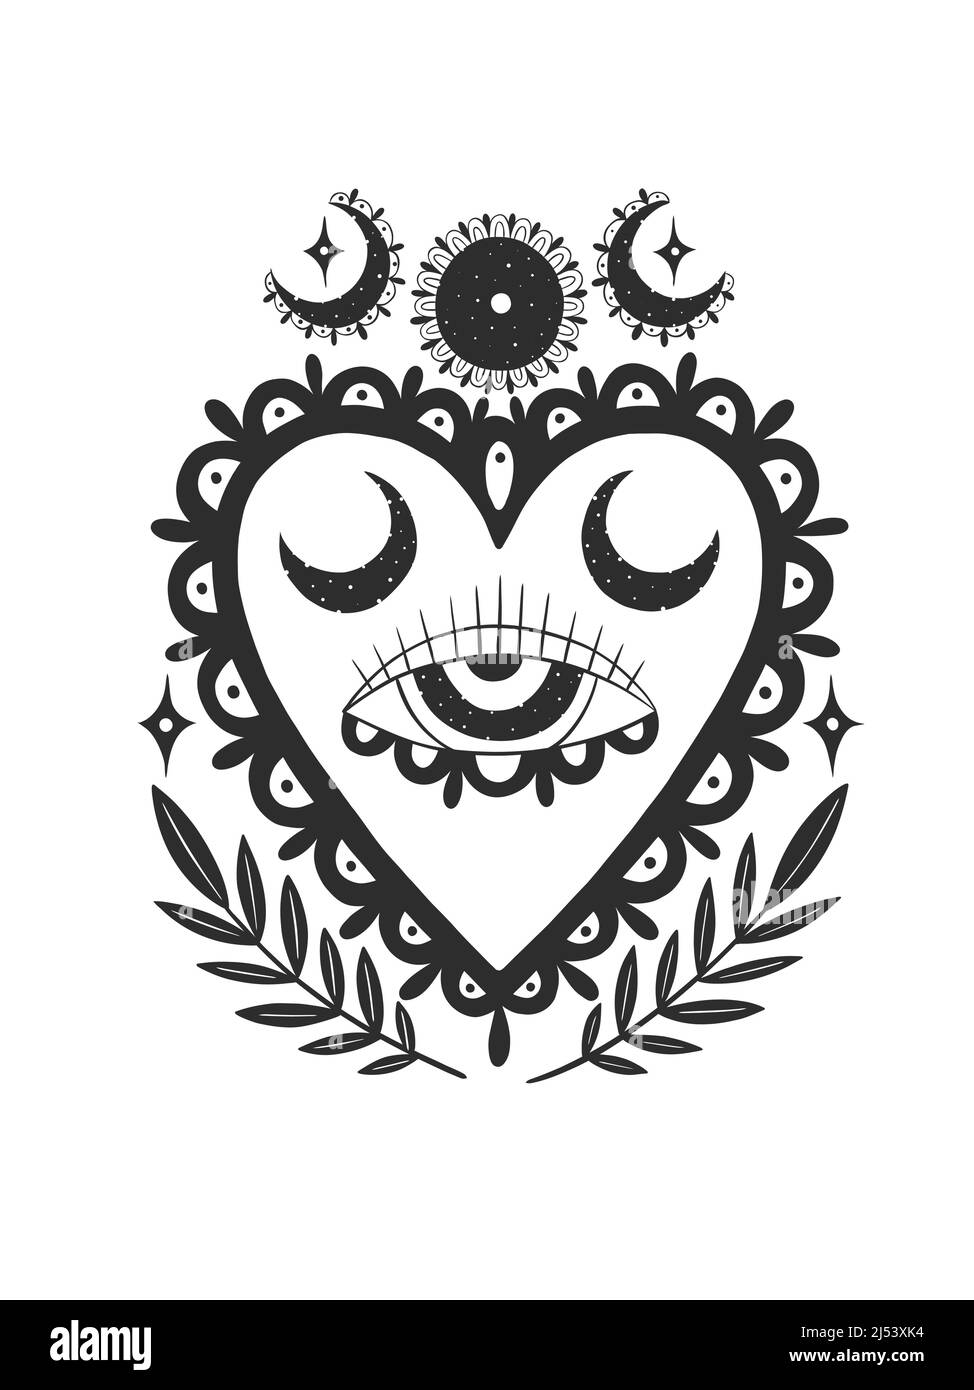 Mystic aesthetic sacred heart of jesus. Hand draw black color.Esoteric sign alchemy. Stock Vector